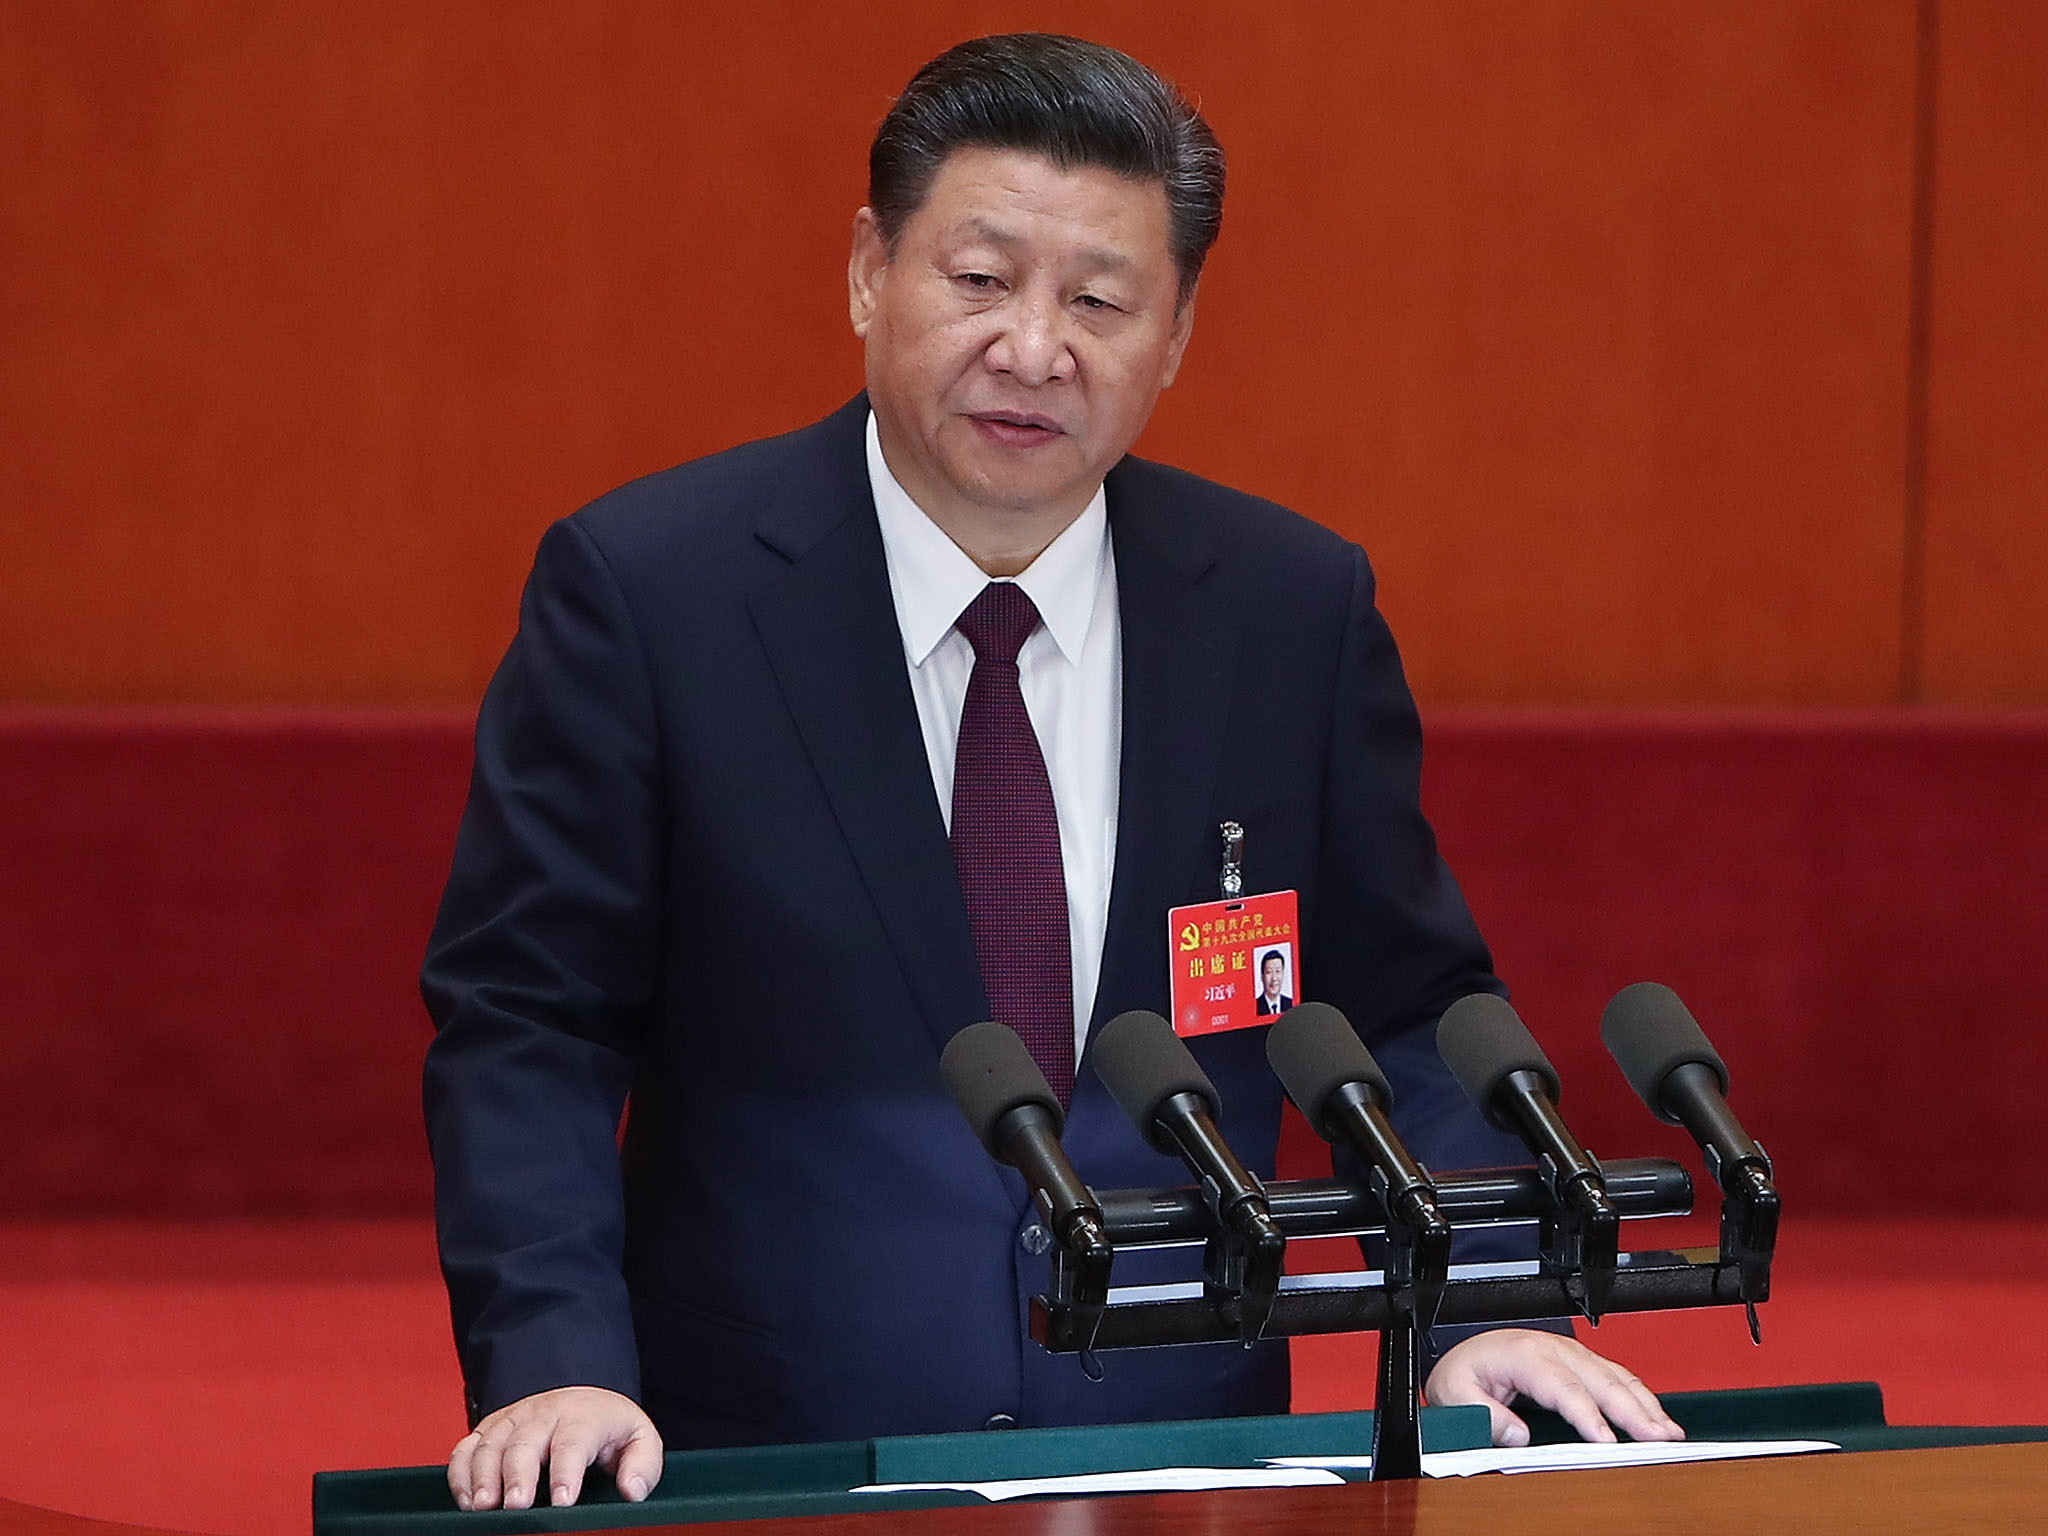 2048x1536 China amends constitution to enshrine President Xi Jinping as most powerful  leader since Chairman Mao | The Independent